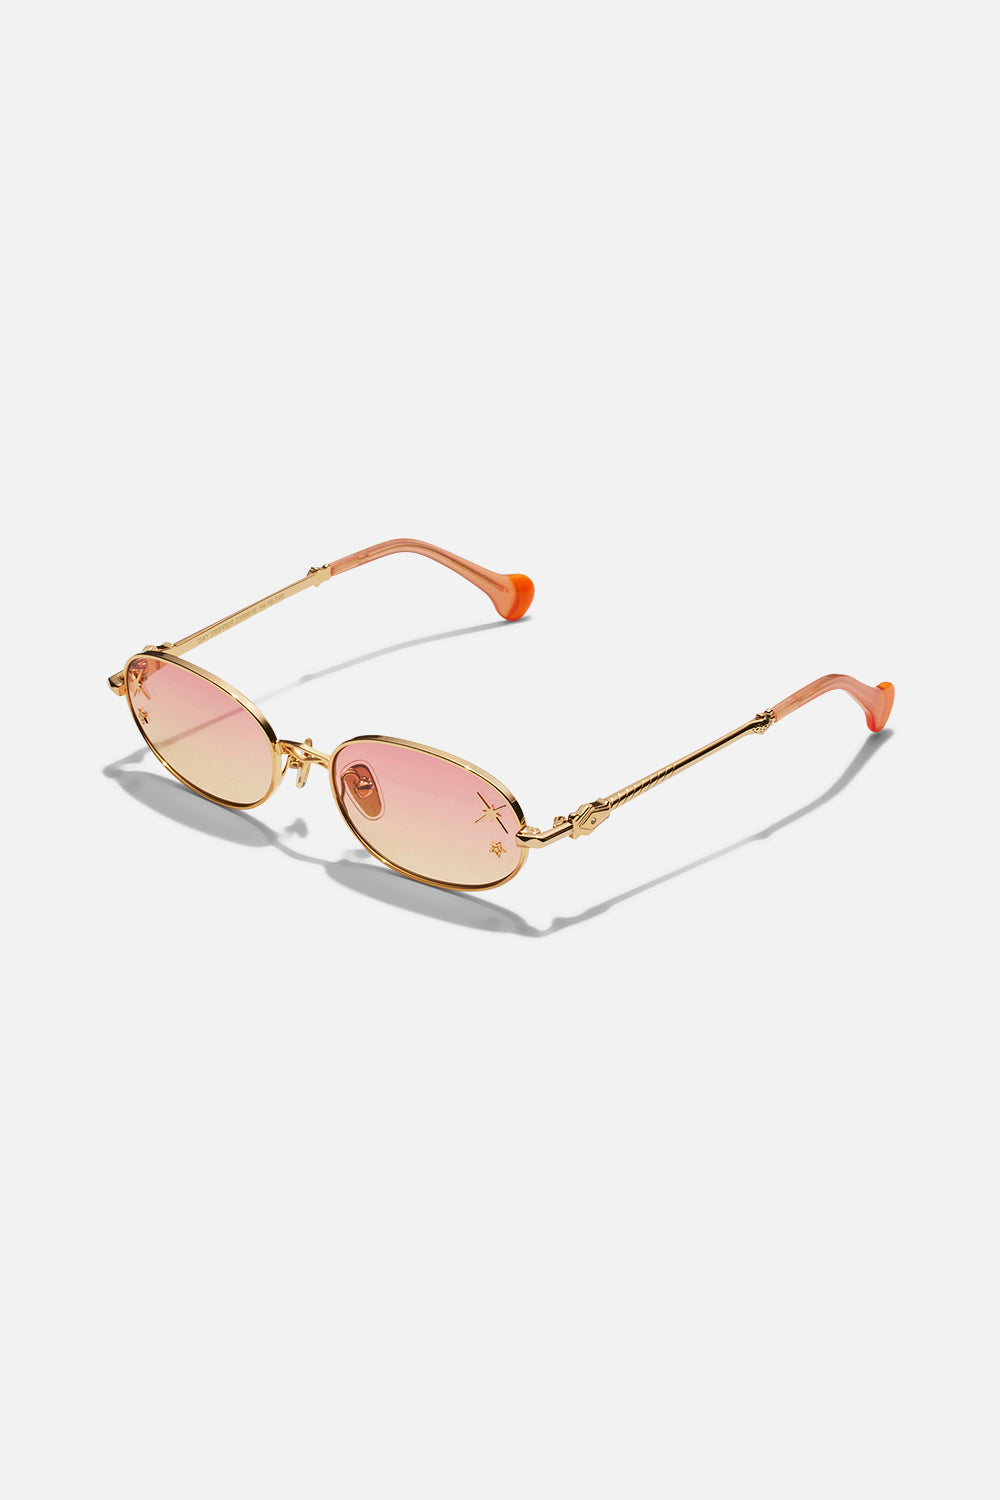 Day Tripper Sunglasses  ombre  sunglasses with gold frame by CAMILLA